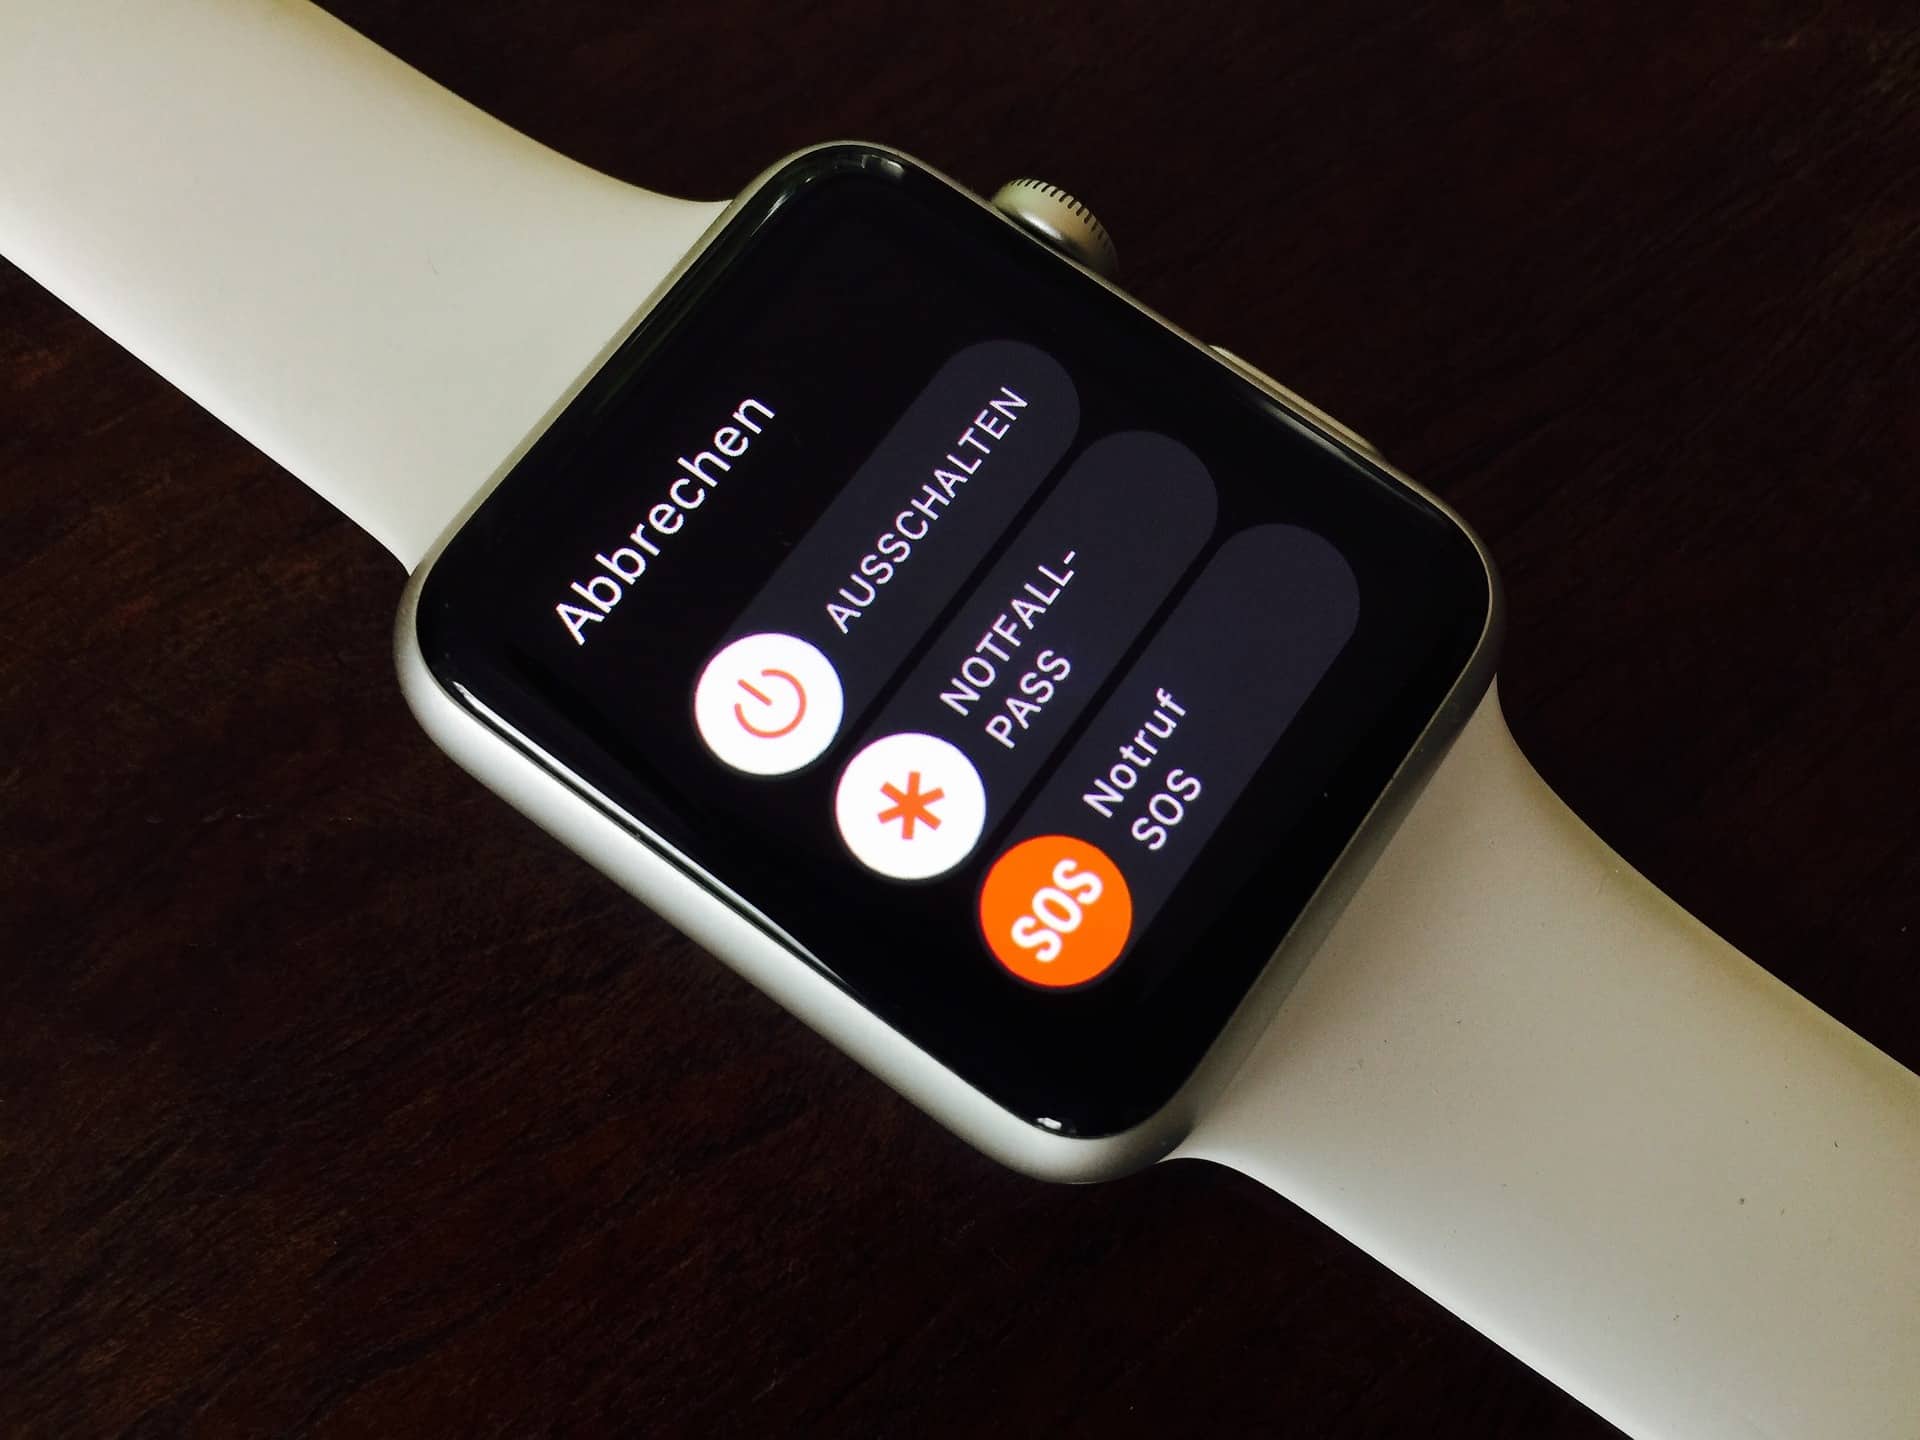 Apple Watch Sales Officially Resume After Ban!